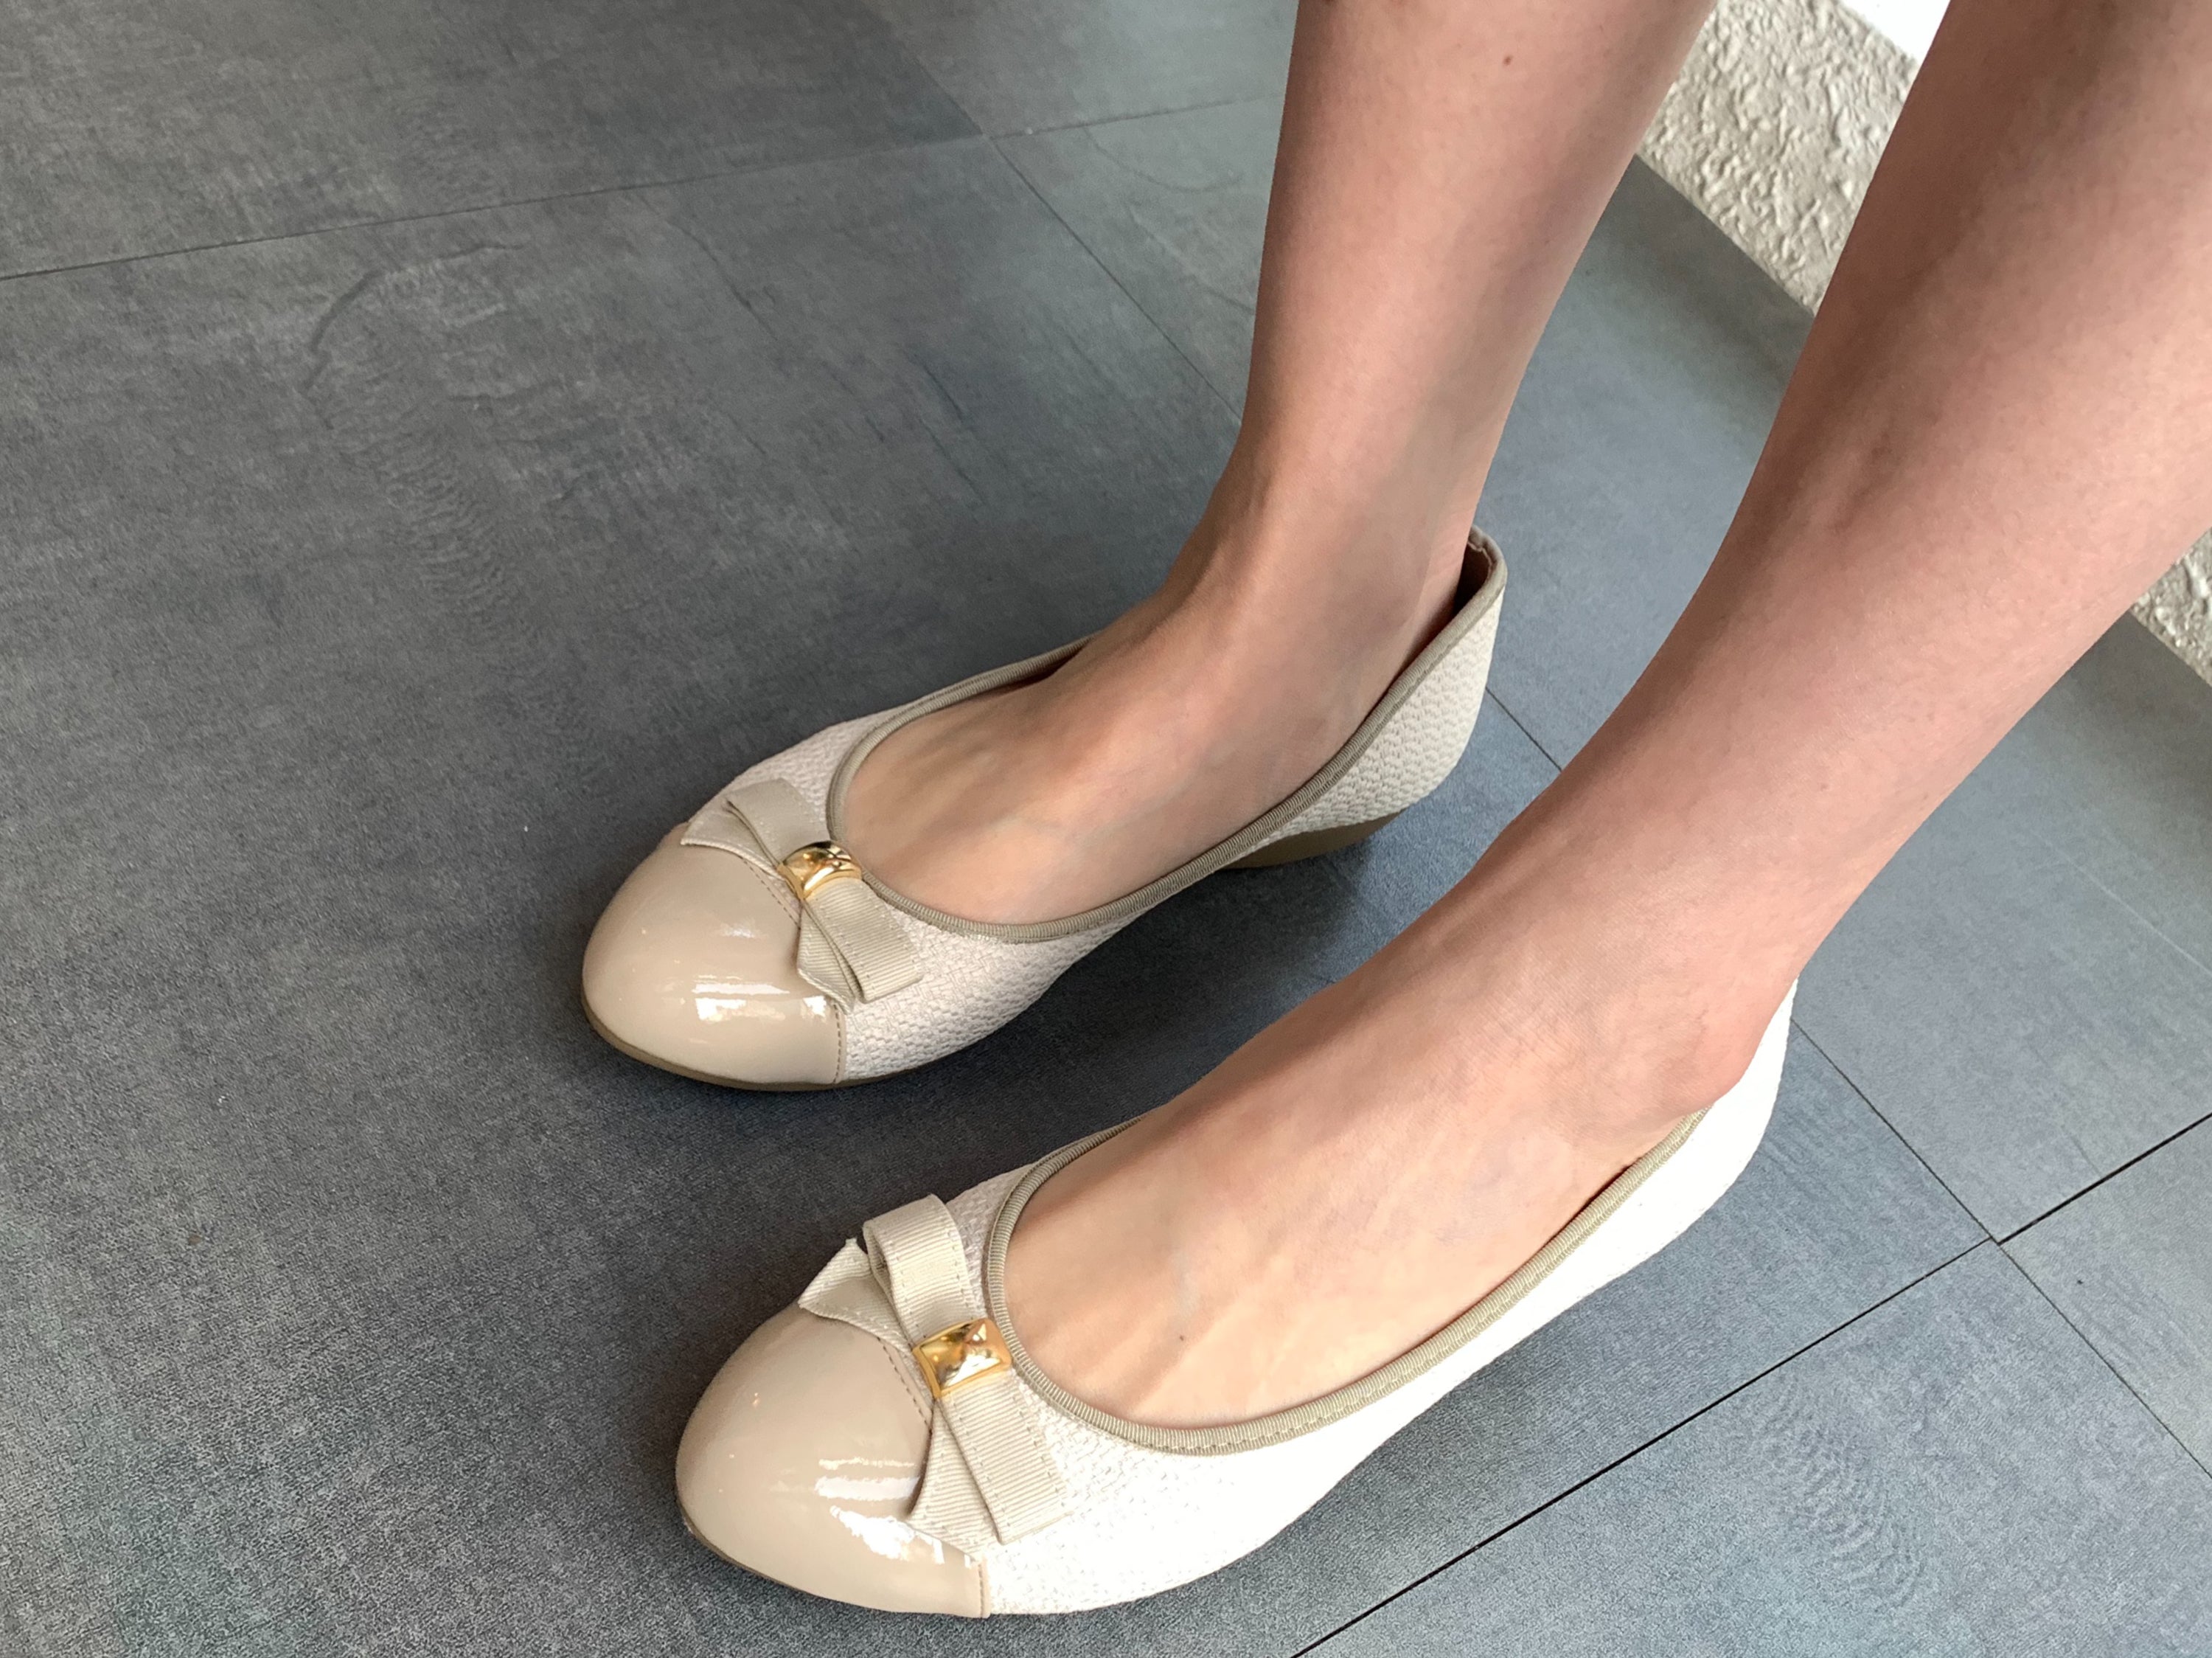 Japan Fashion Flats with Bow (Soft Soles)